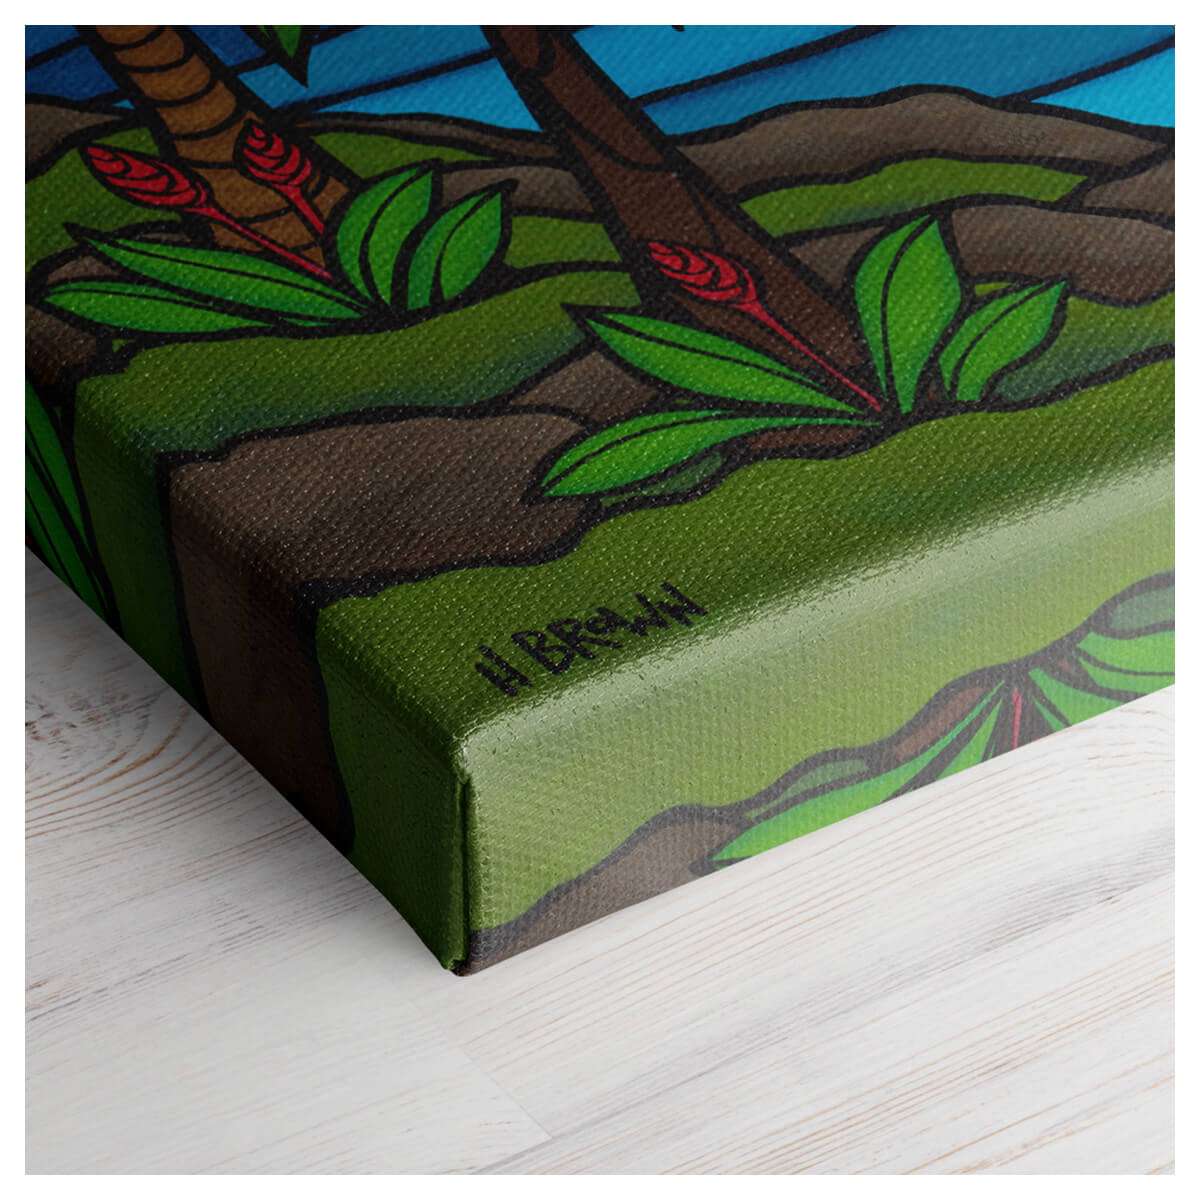 Gallery wrapped edge of colorful canvas art print "Lazy Hibiscus" by Kauai artist Heather Brown.